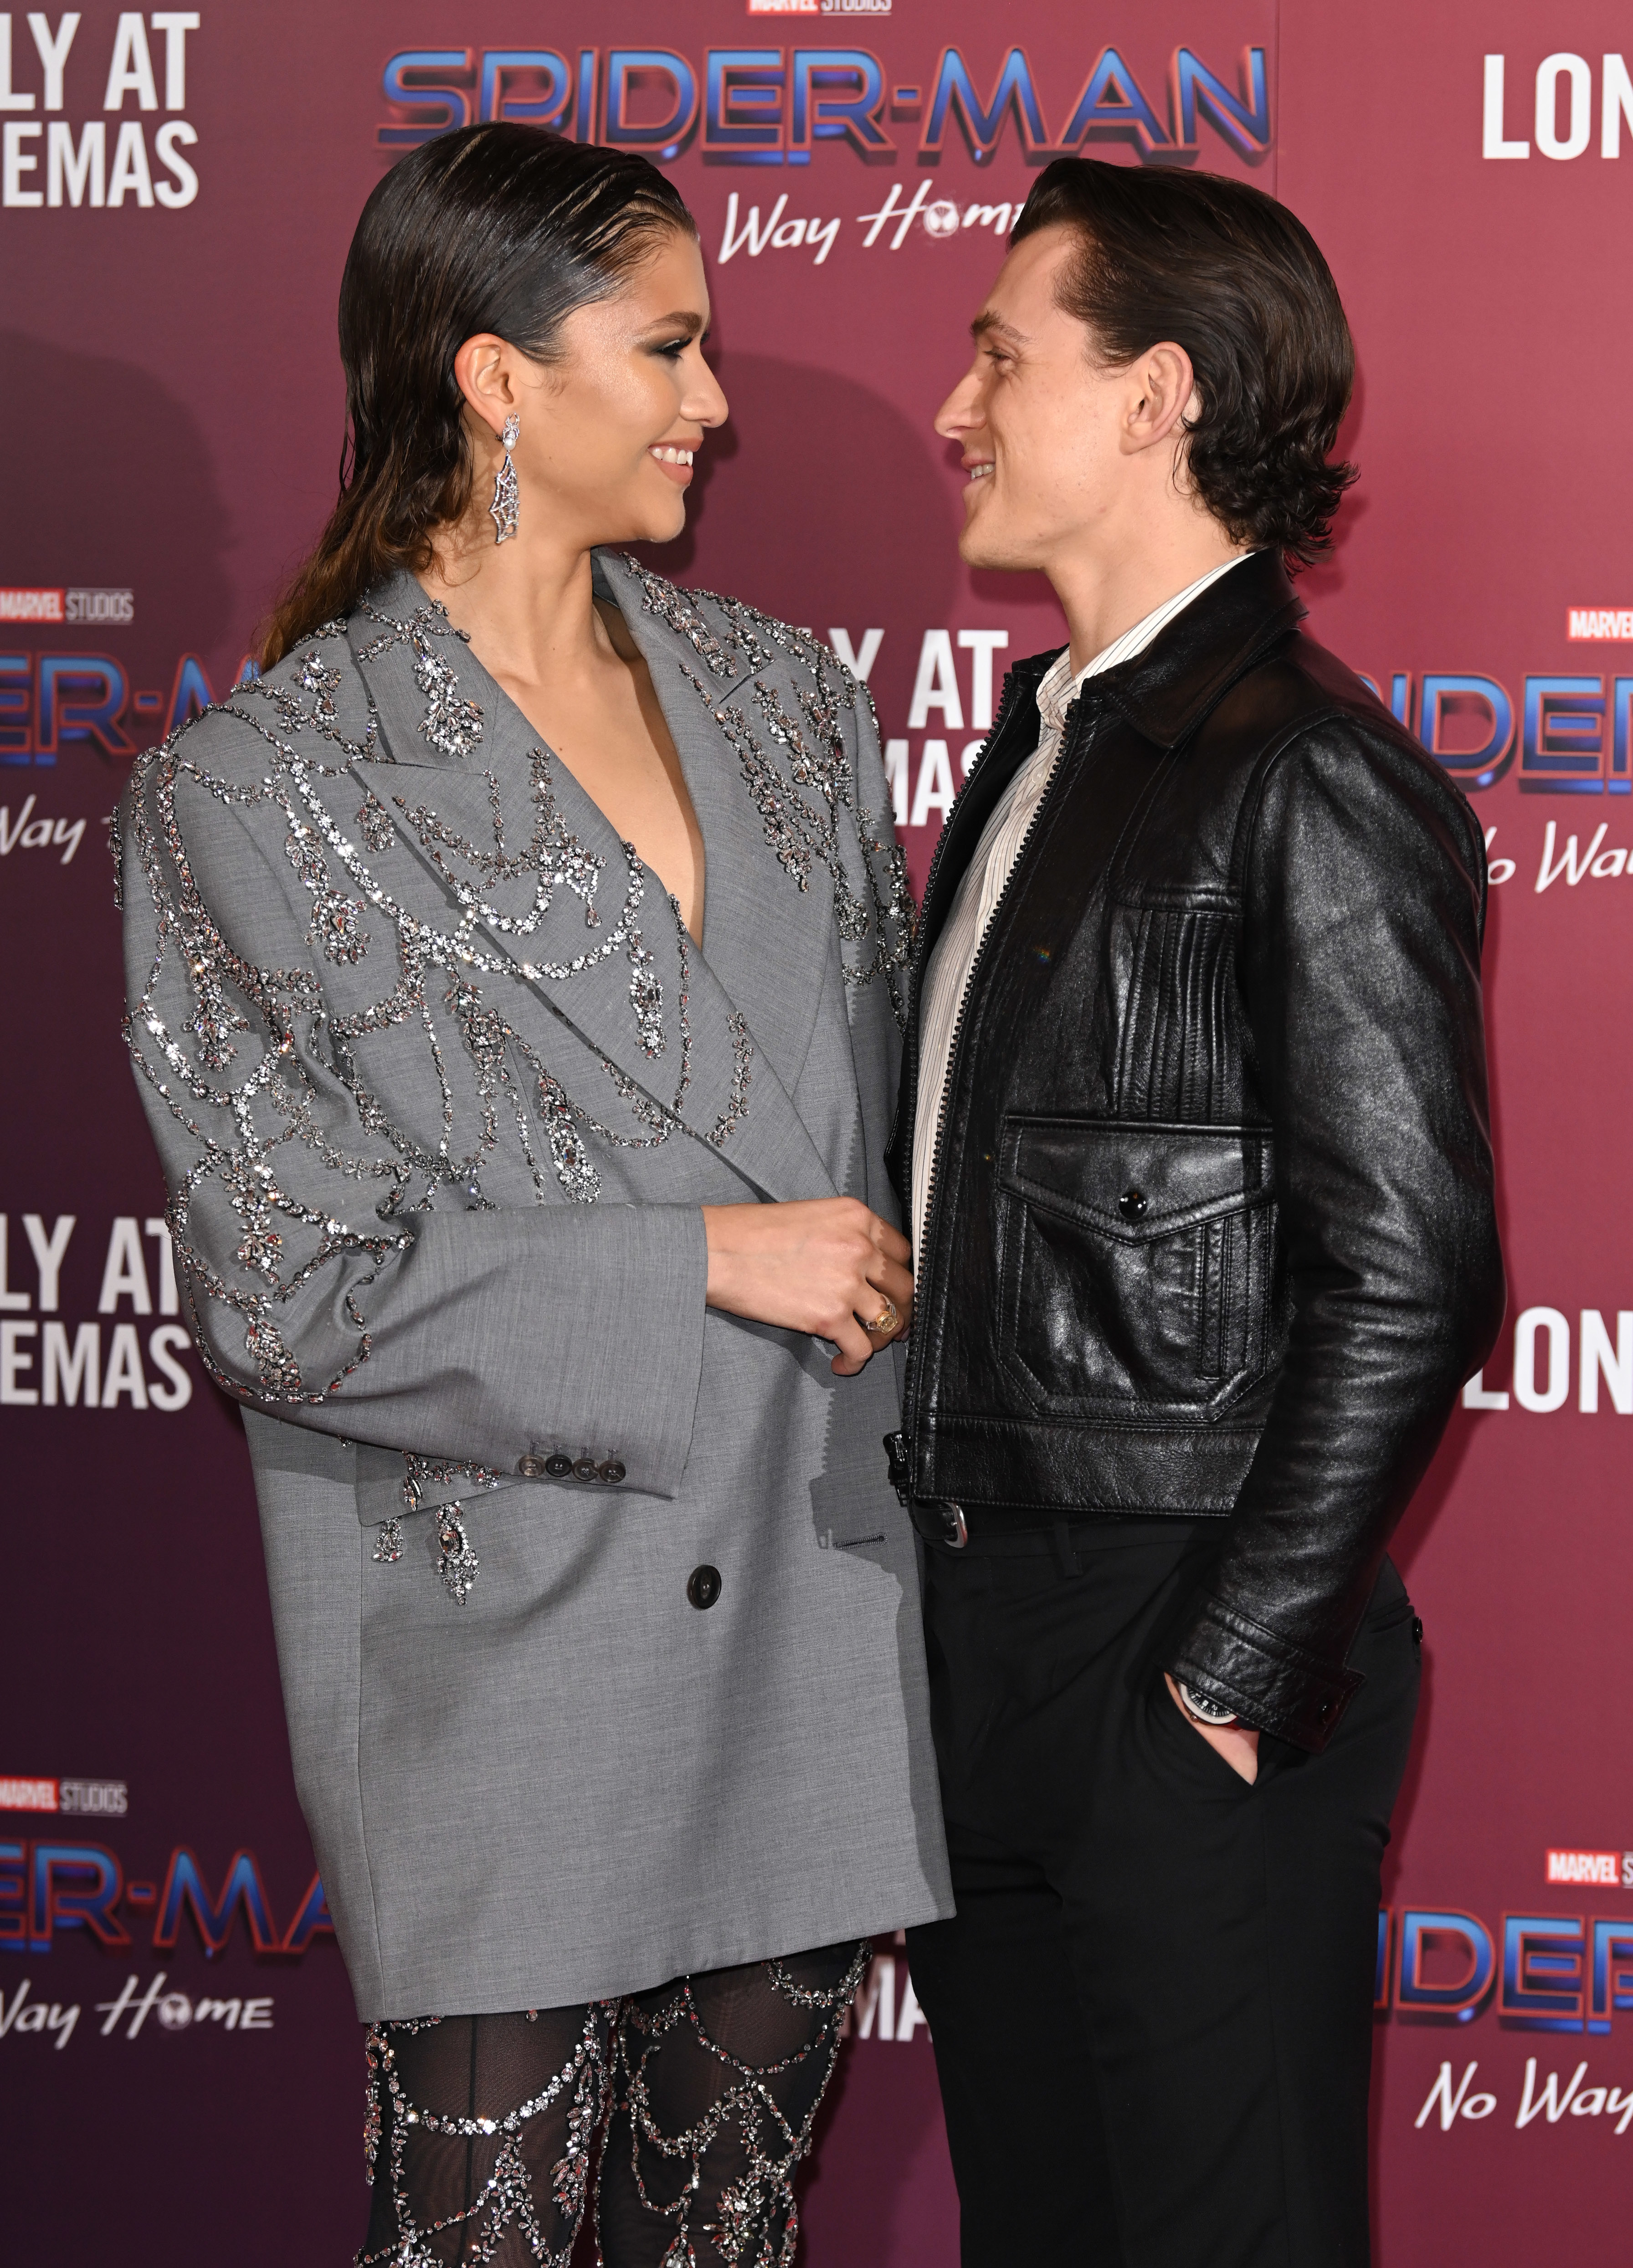 the two looking at each other at the spider-man premiere